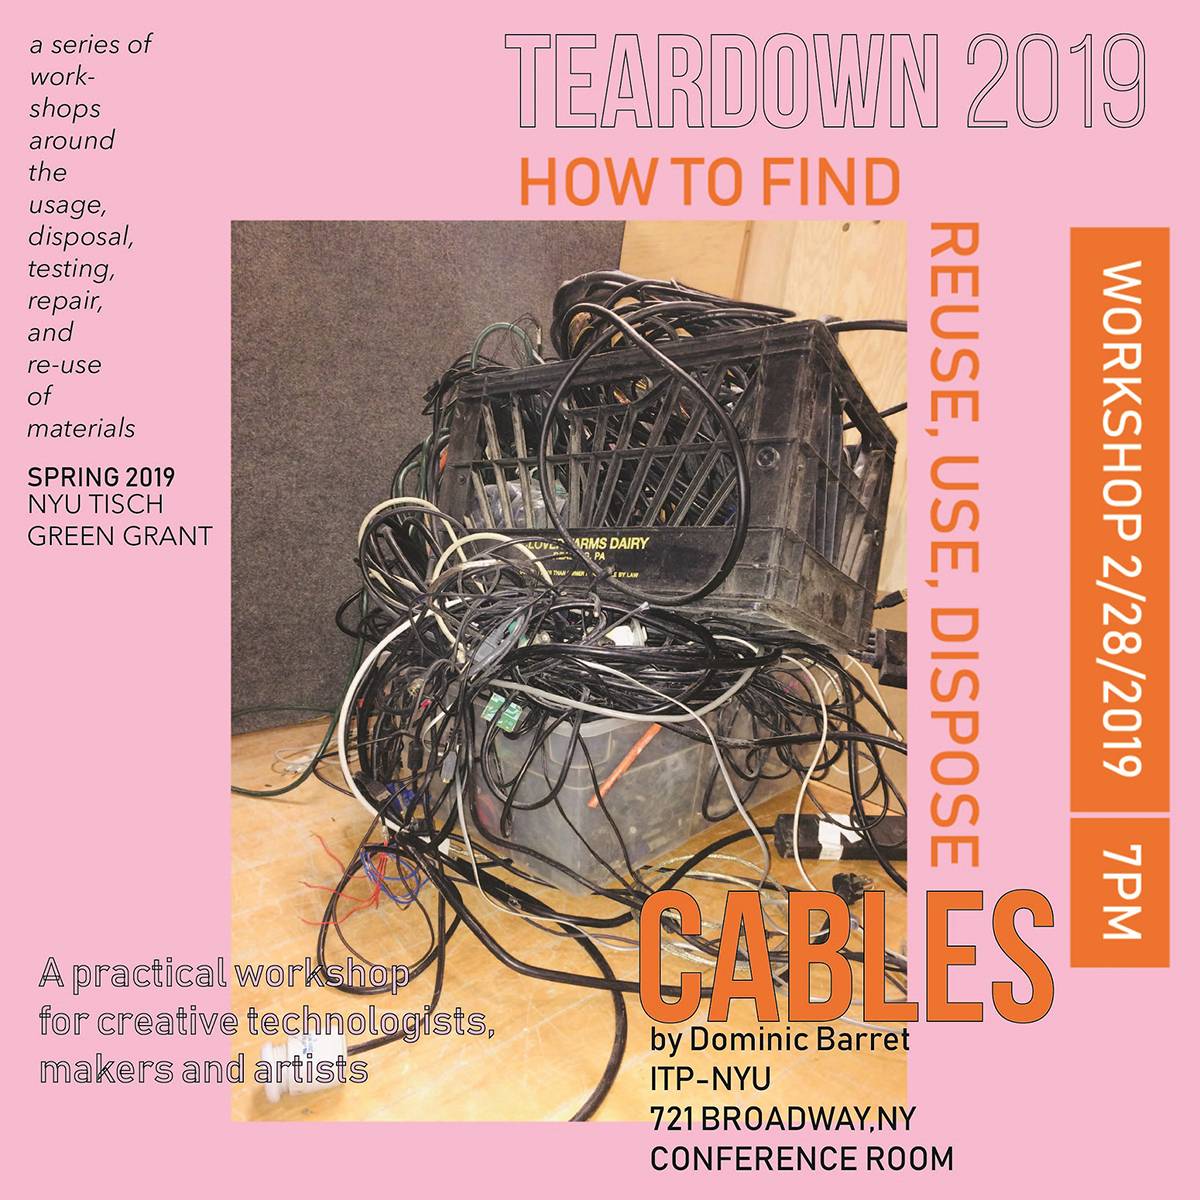 Image of poster for teardown workshop two.